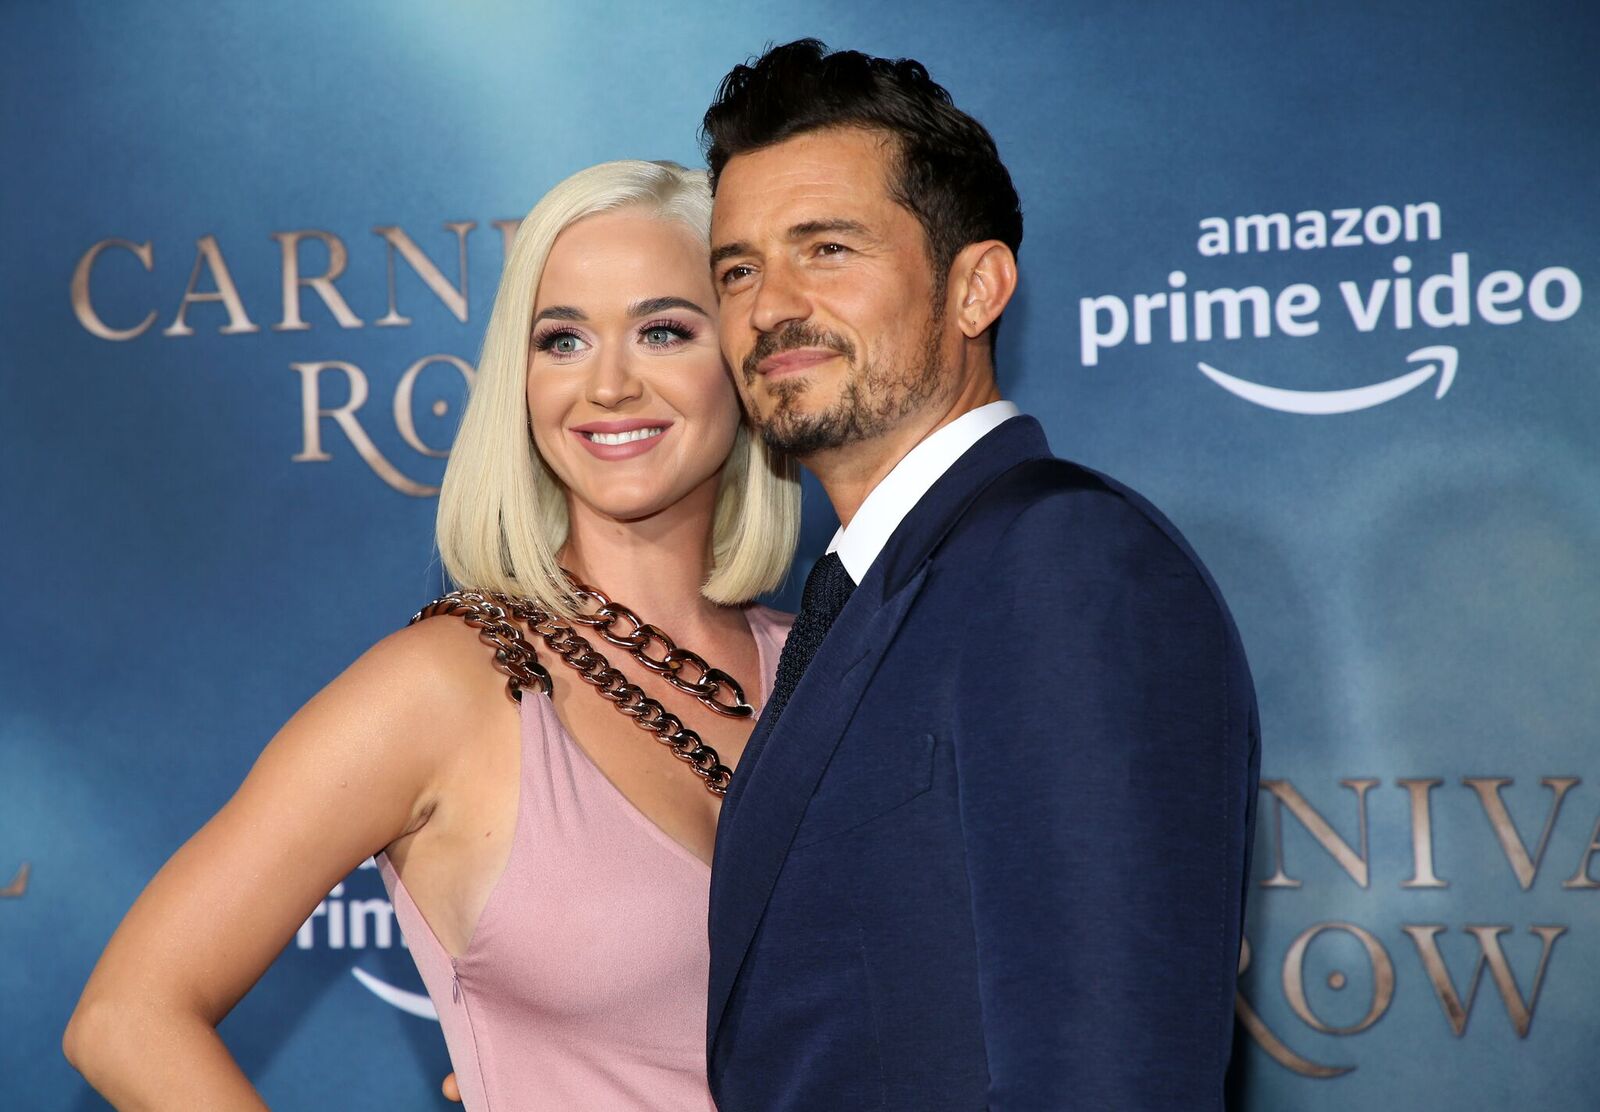 Katy Perry and Orlando Bloom at the LA premiere of Amazon's "Carnival Row" at TCL Chinese Theatre on August 21, 2019, in Hollywood, California | Photo: Phillip Faraone/Getty Images